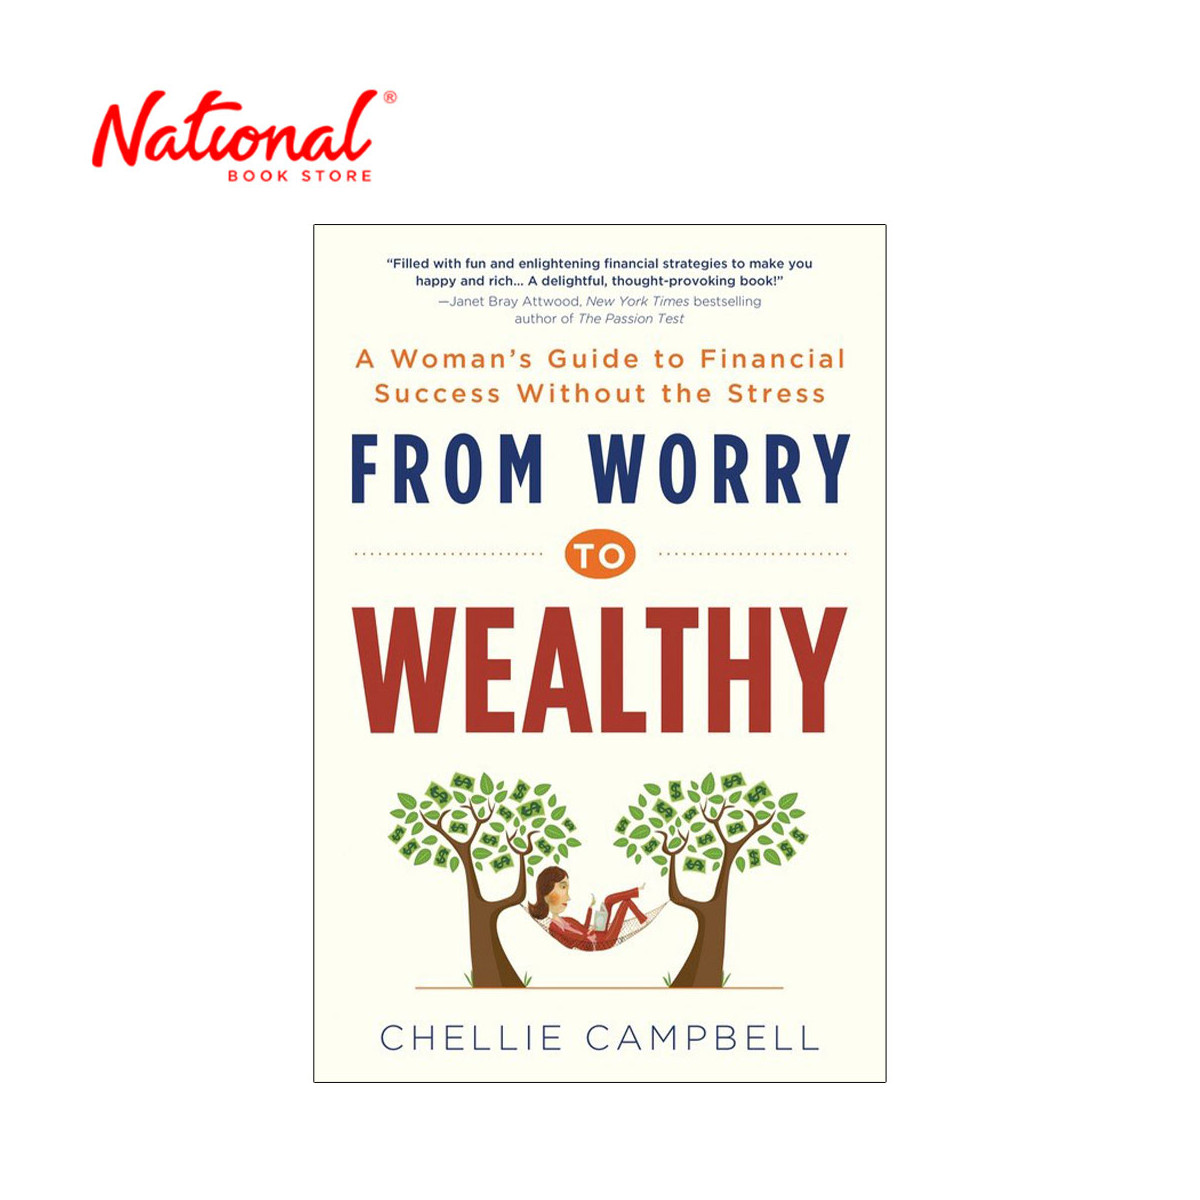 From Worry To Wealthy by Chellie Campbell - Trade Paperback - Non-Fiction - Business & Investing